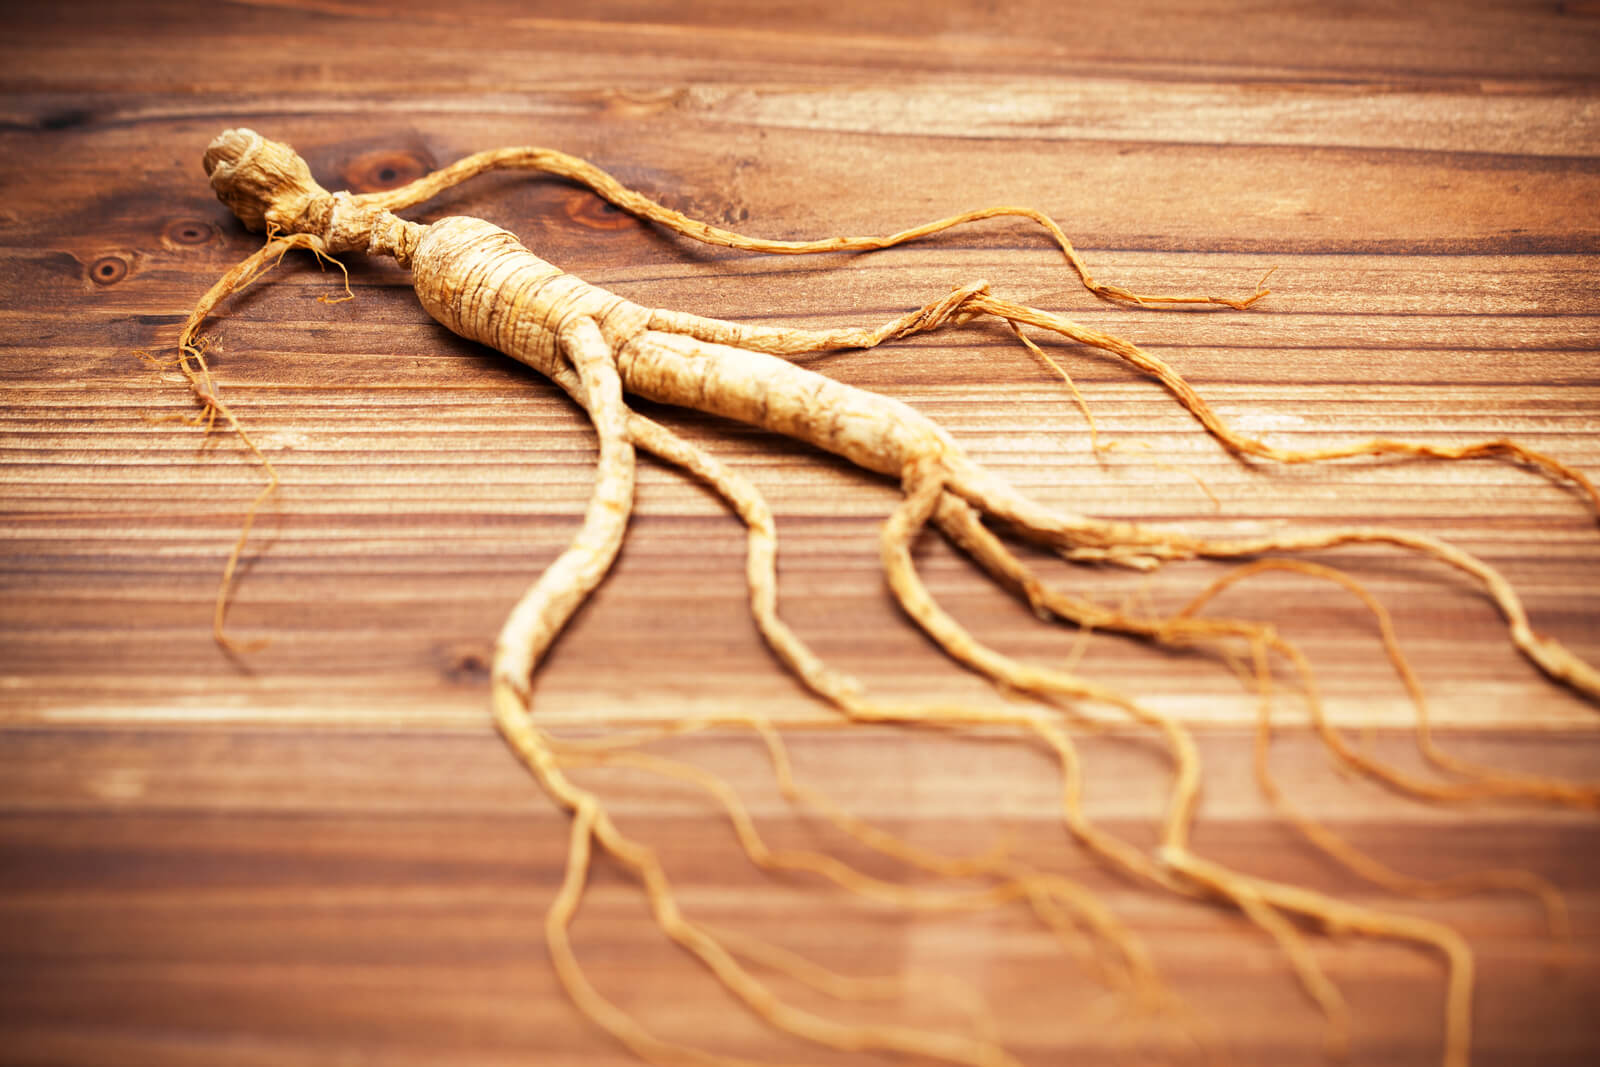 Ginseng root on a wooden surface.